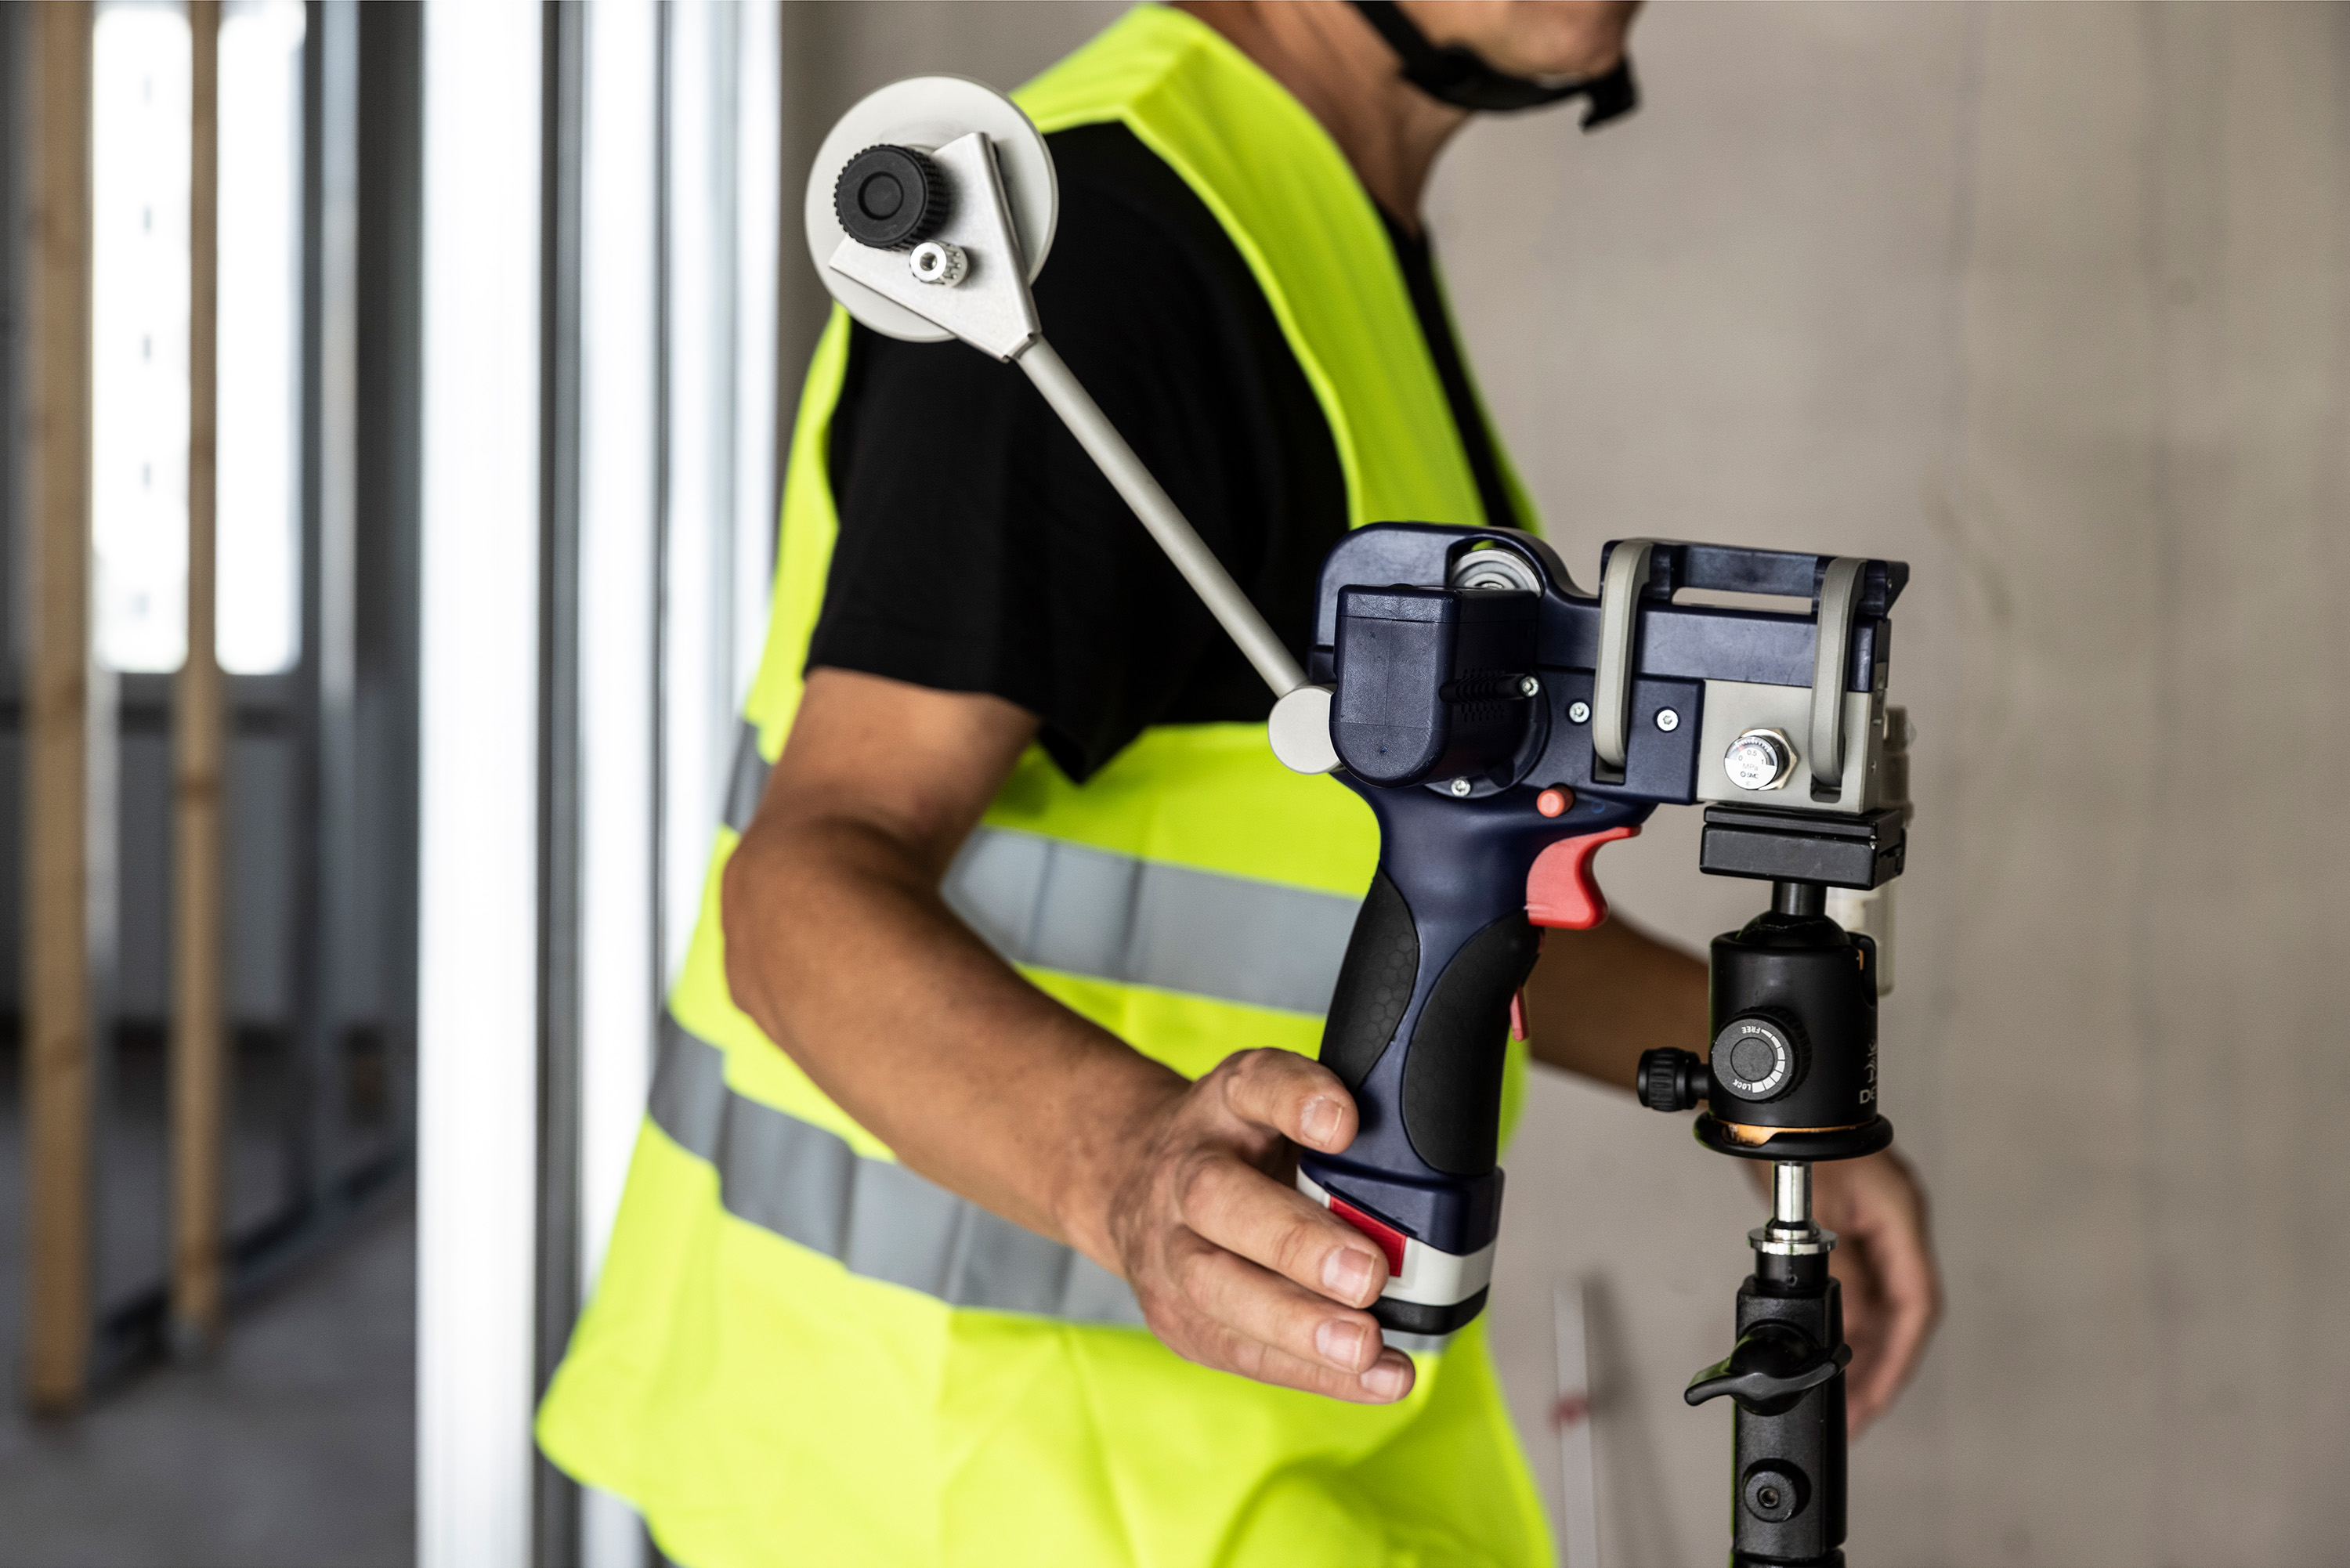 A person in a safety vest holds a Air Blown Fiber Installation Tool, ready to install optical fiber in an indoor construction area.